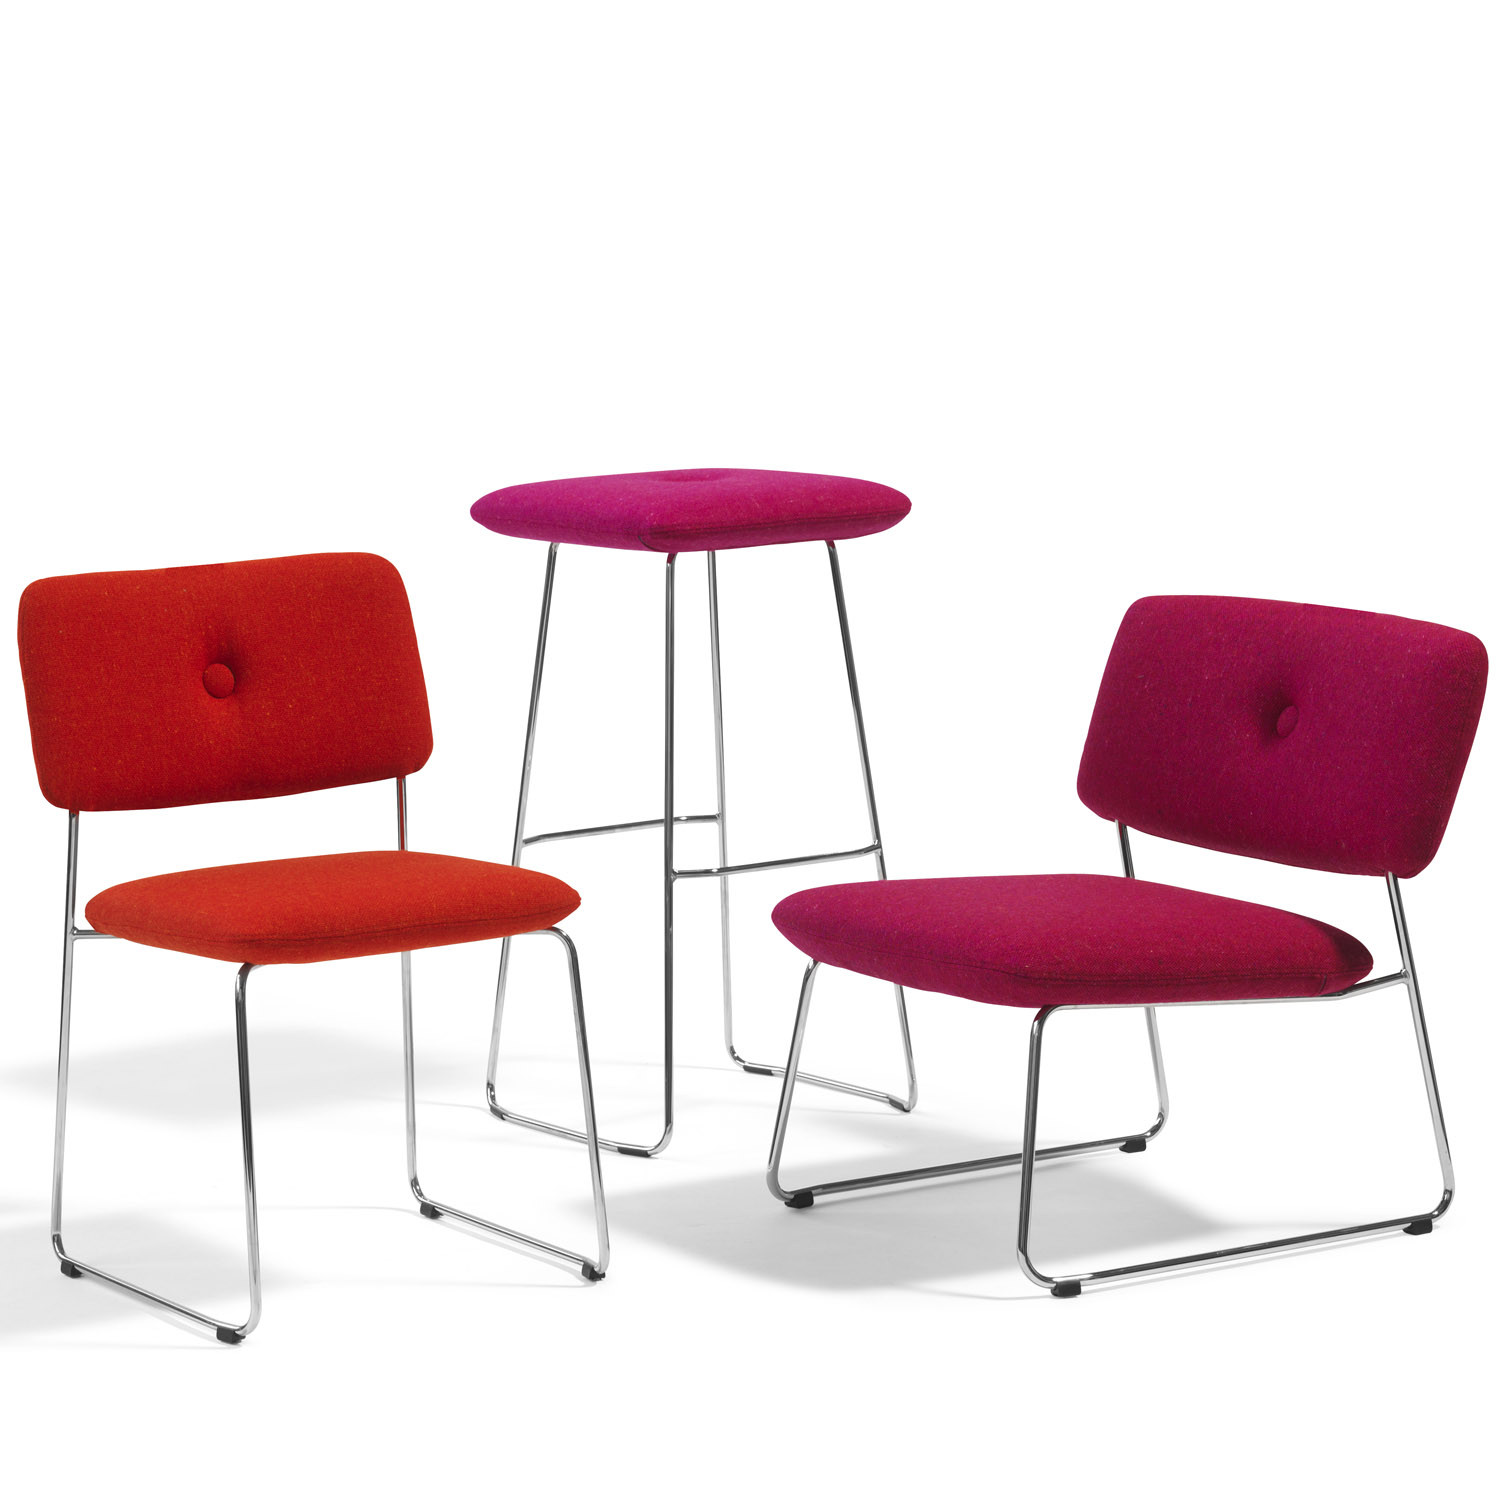 S73-82 Stool with Dundra Chair S70